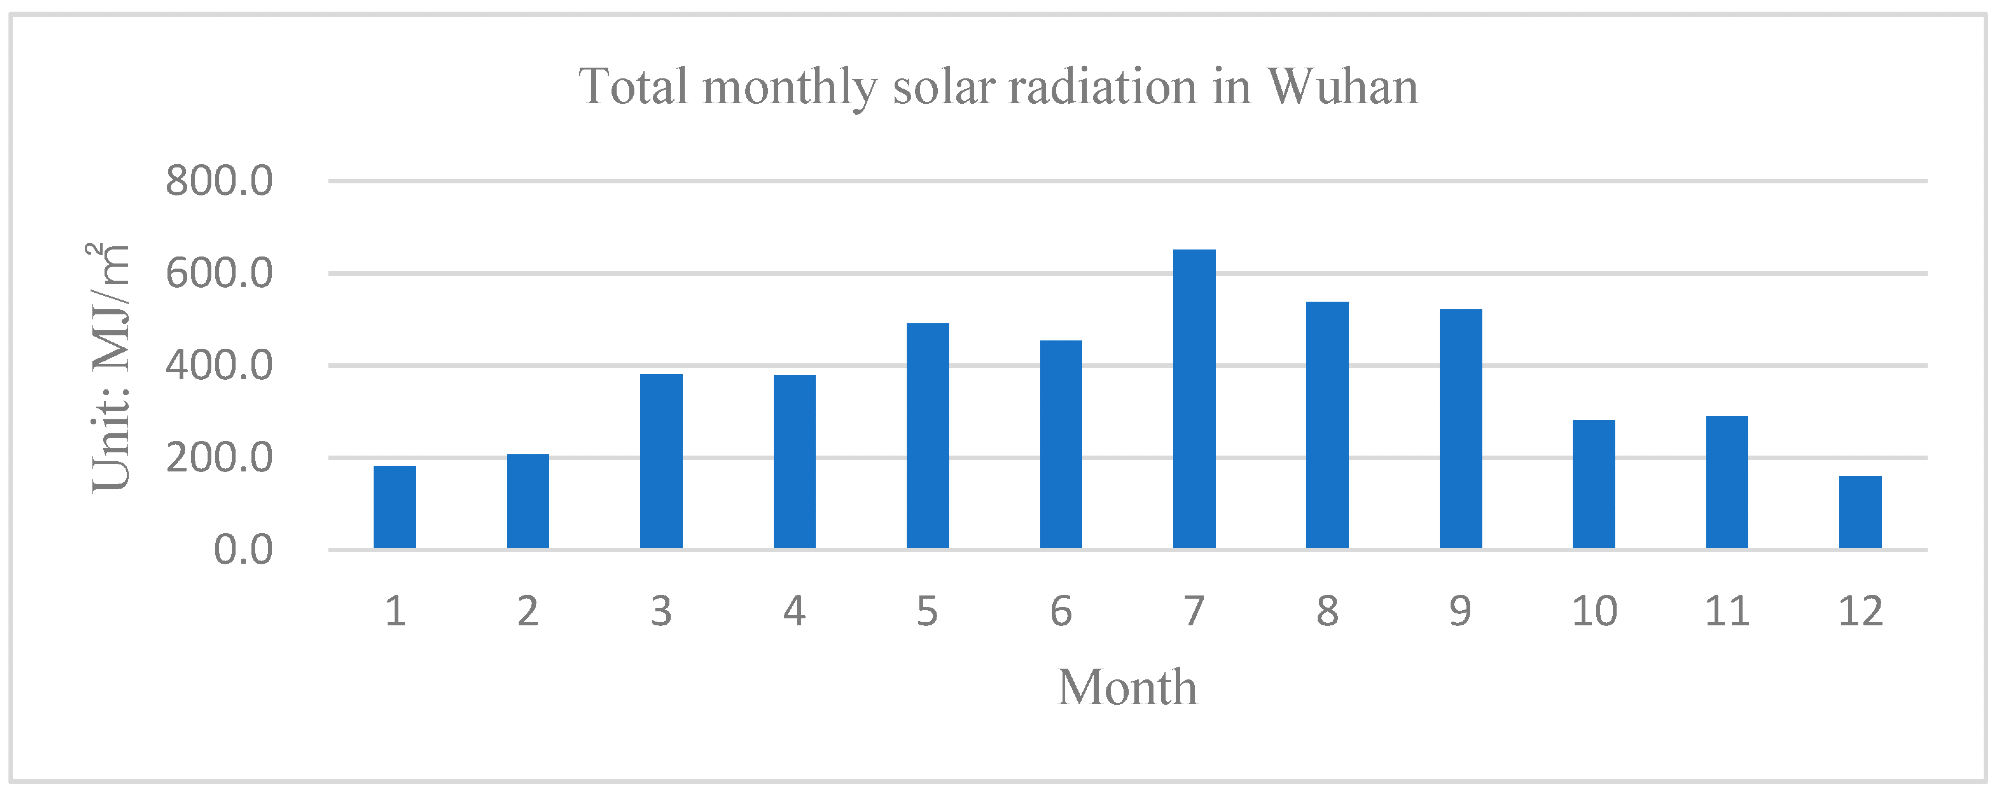 Total monthly solar radiation in Wuhan.